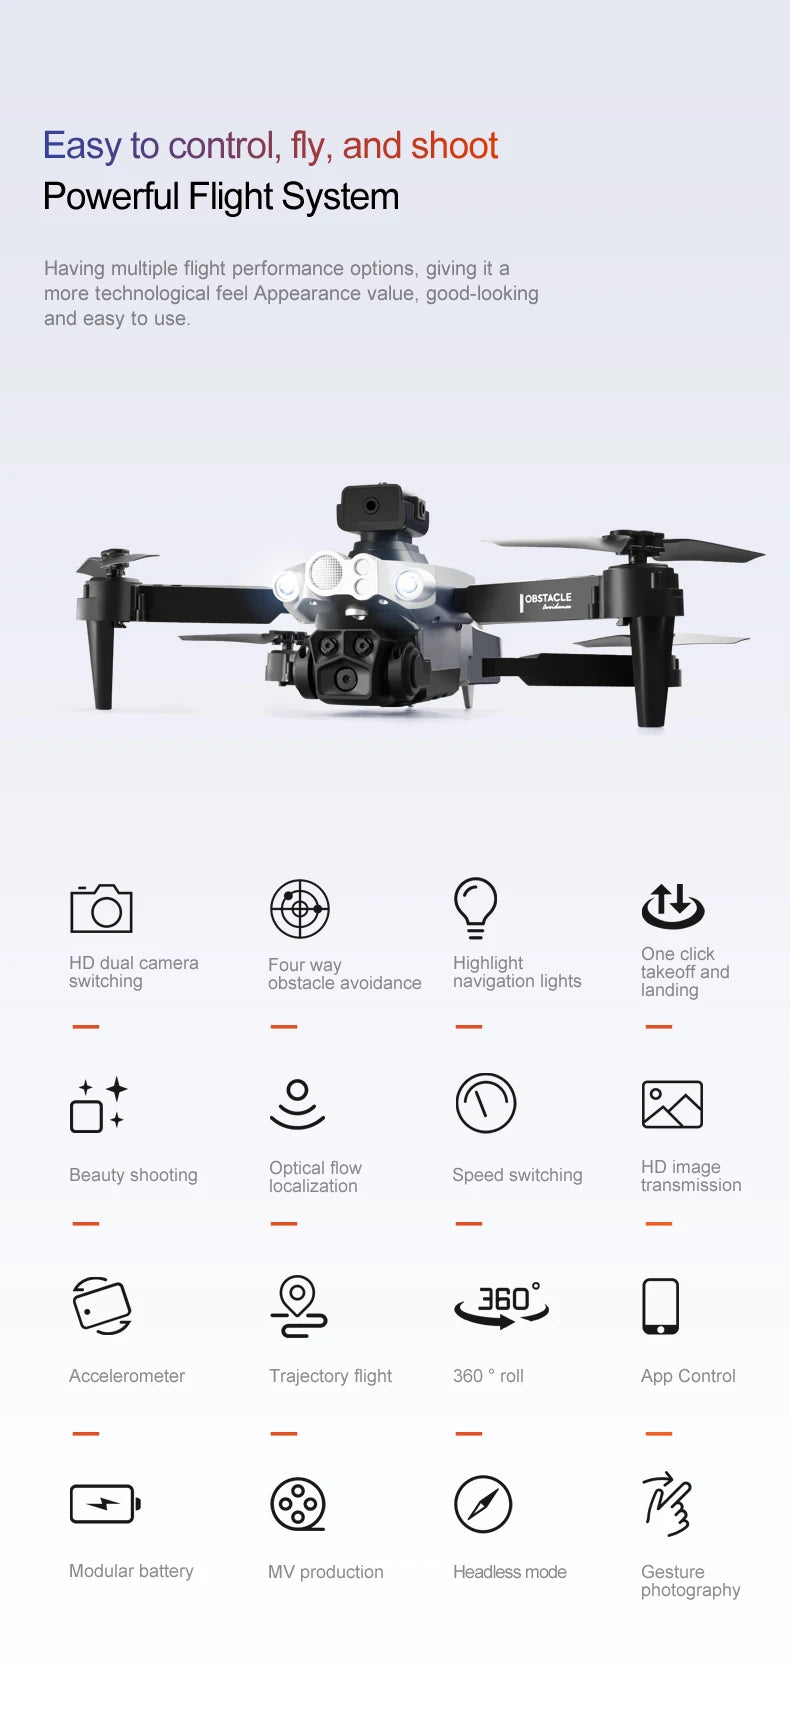 LU200 Drone, easy to control, fly, and shoot powerful flight system having multiple flight